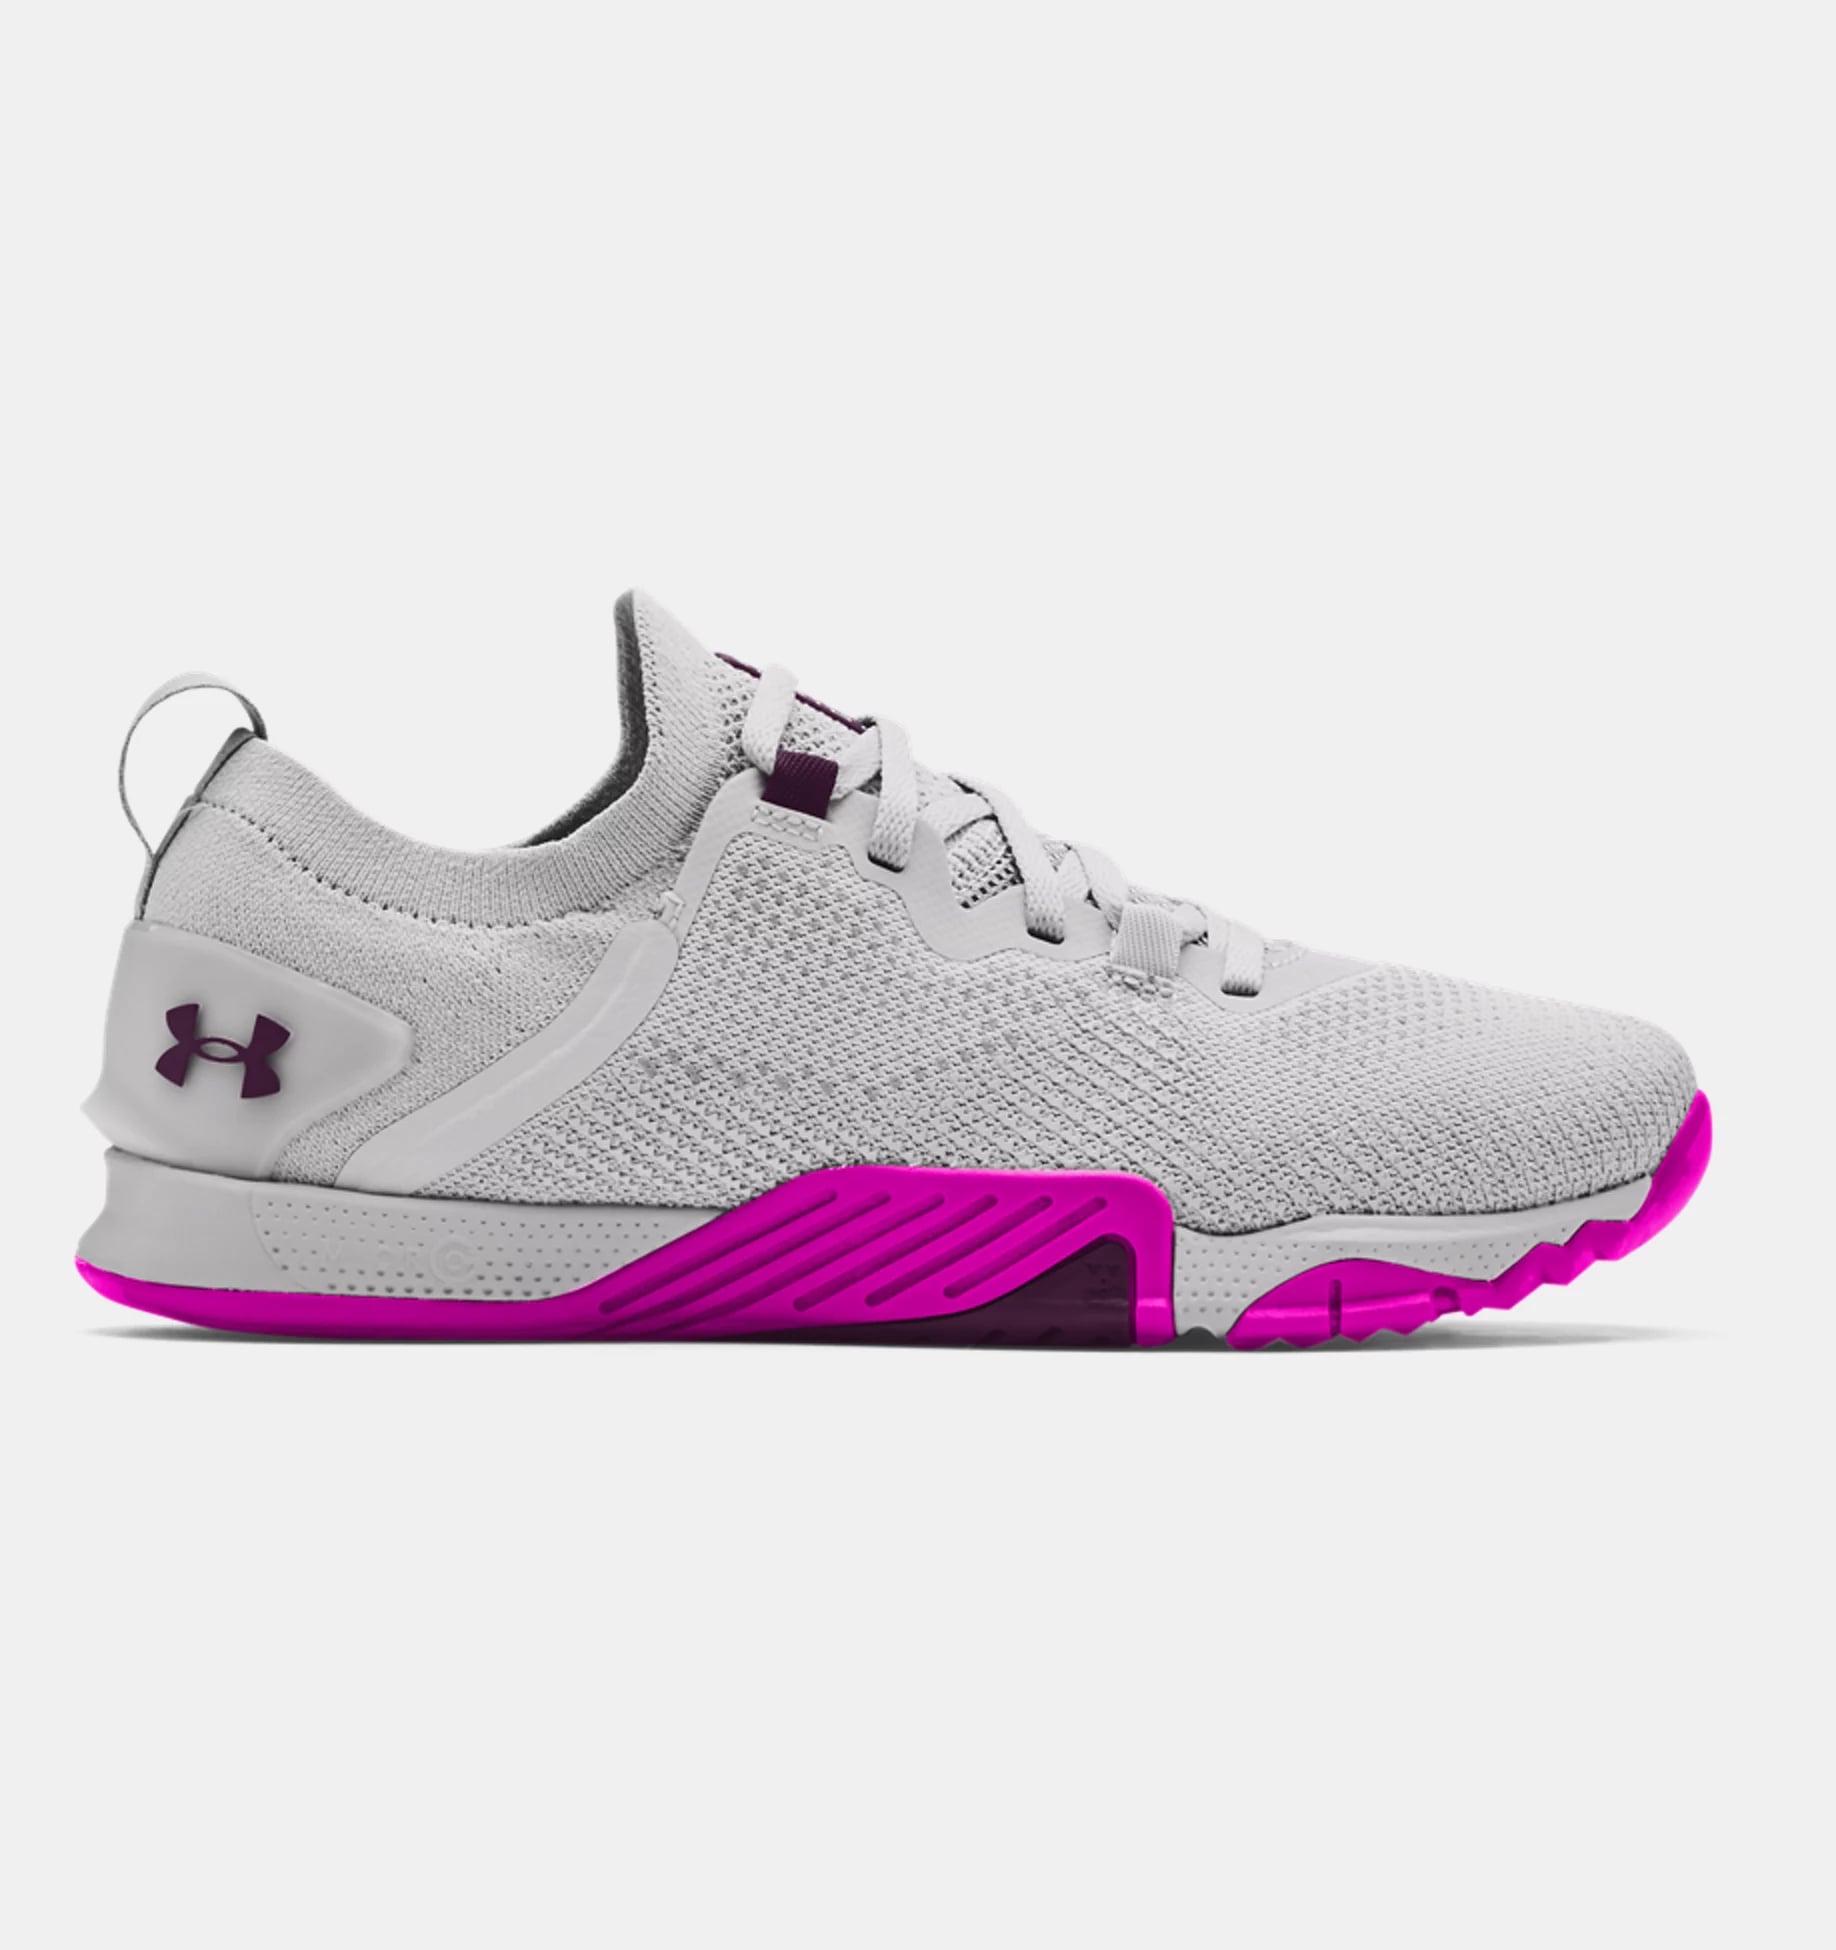 Best Under Armour Shoes For Every Exercise | POPSUGAR Fitness UK